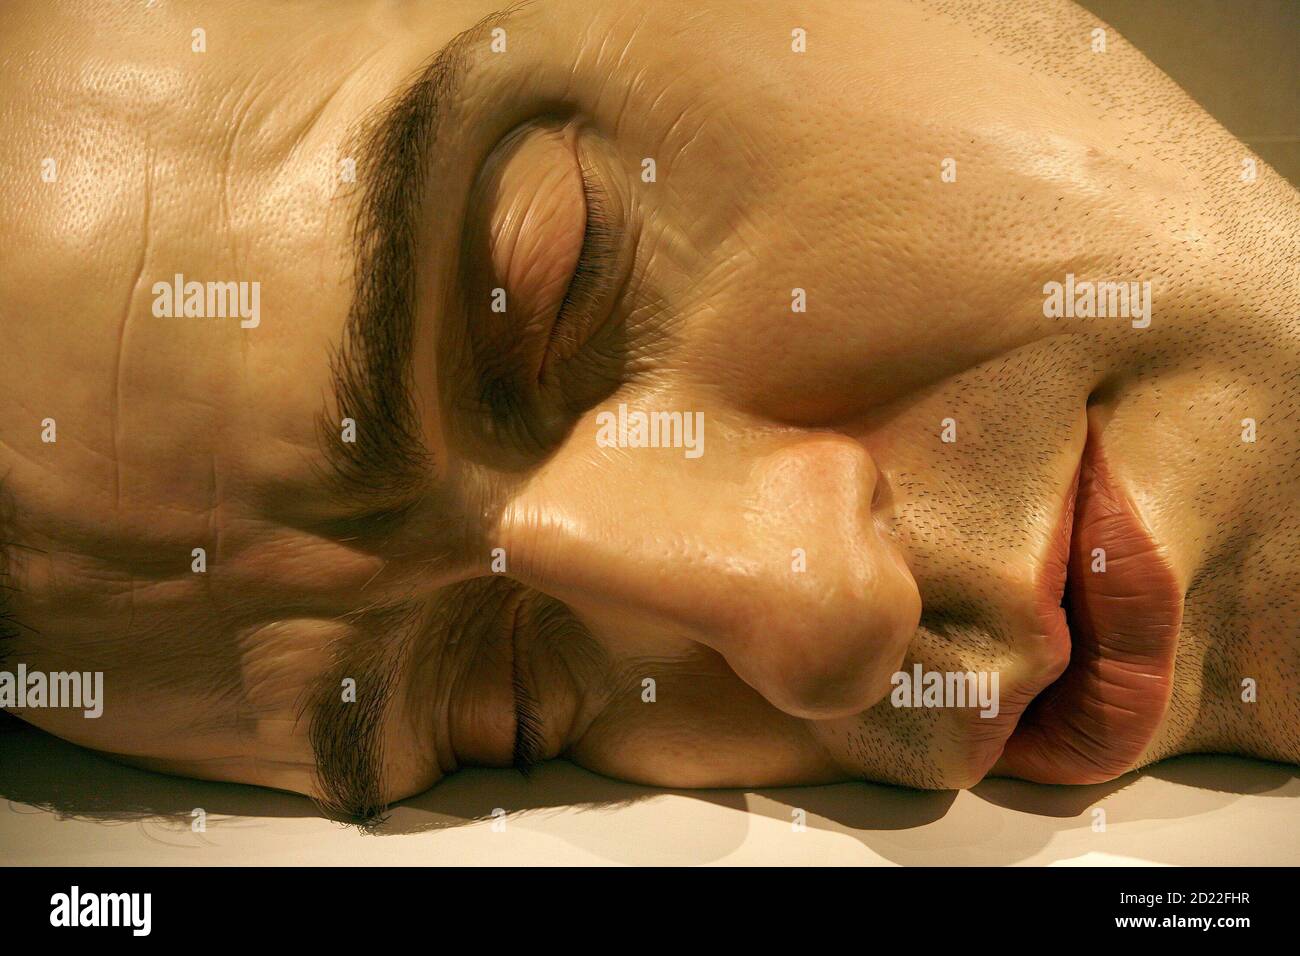 A sculpture entitled 'Mask II' by artist Ron Mueck is displayed at the  British Museum in London October 2, 2008. The sculpture is part of an  exhibition entitled Statuephilia at the British